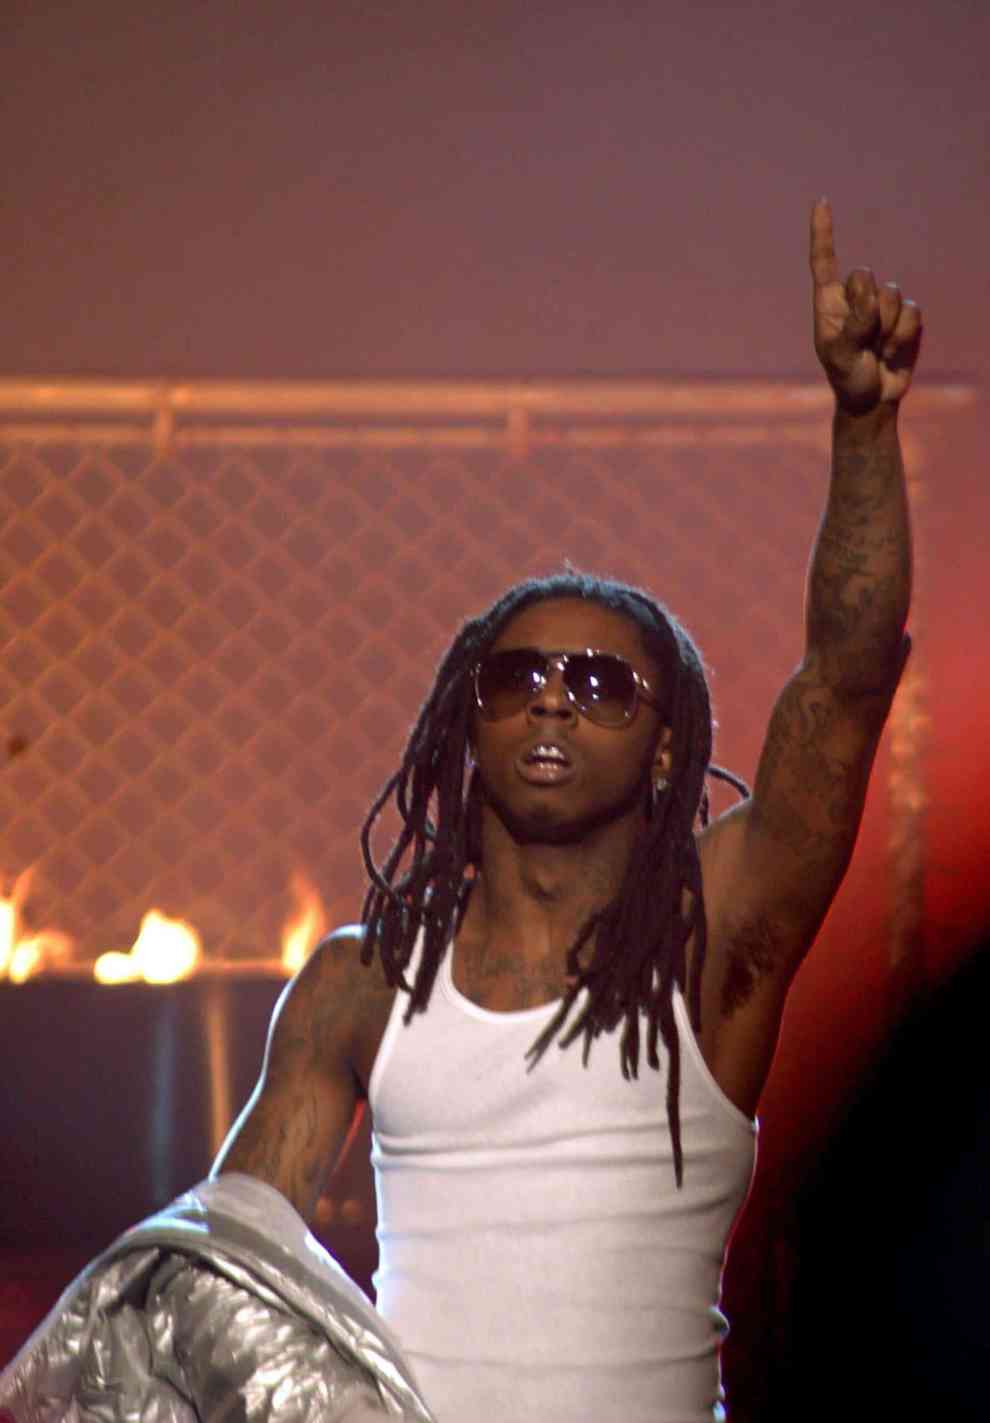 Lil Wayne performing and pointing up with left hand